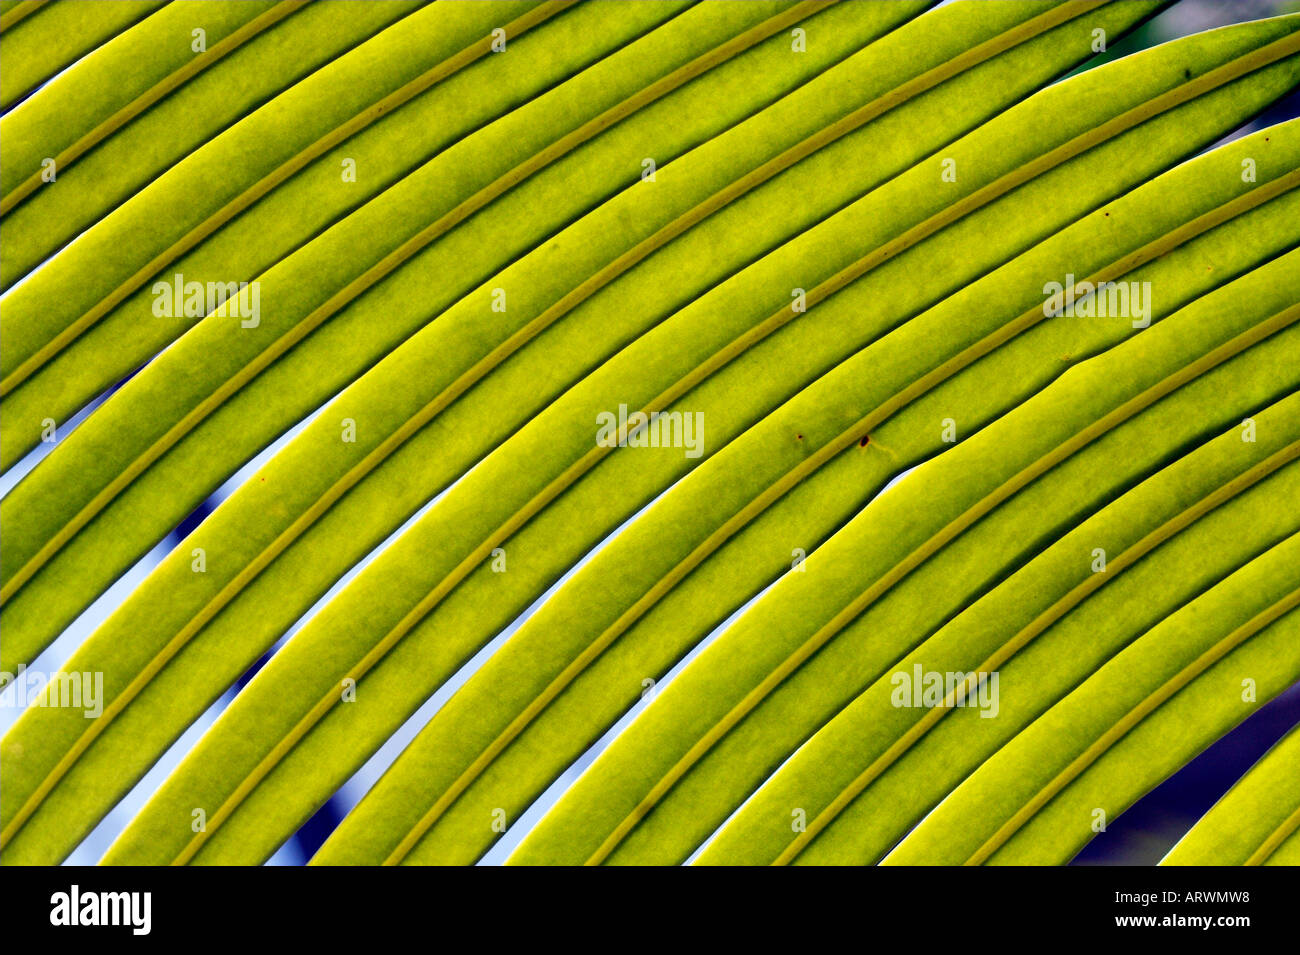 Leaves Of The Sago Palm Or Cycas Circinalis Stock Photo